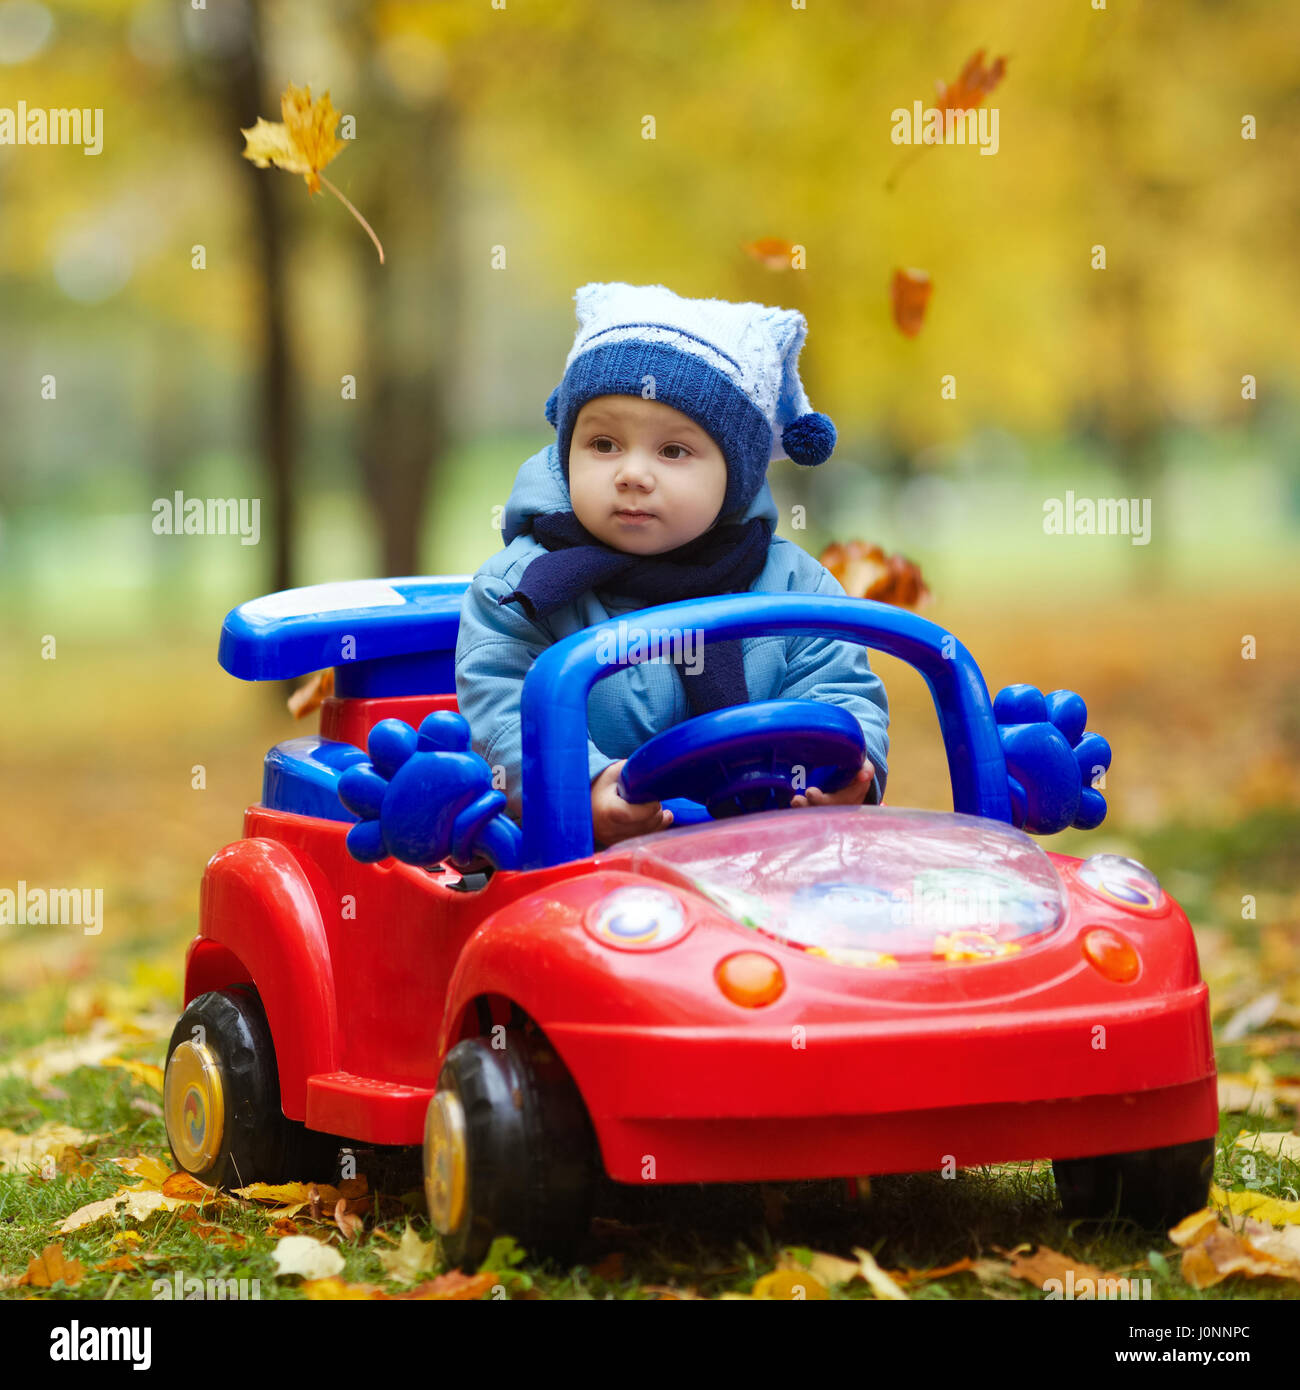 kid in toy car